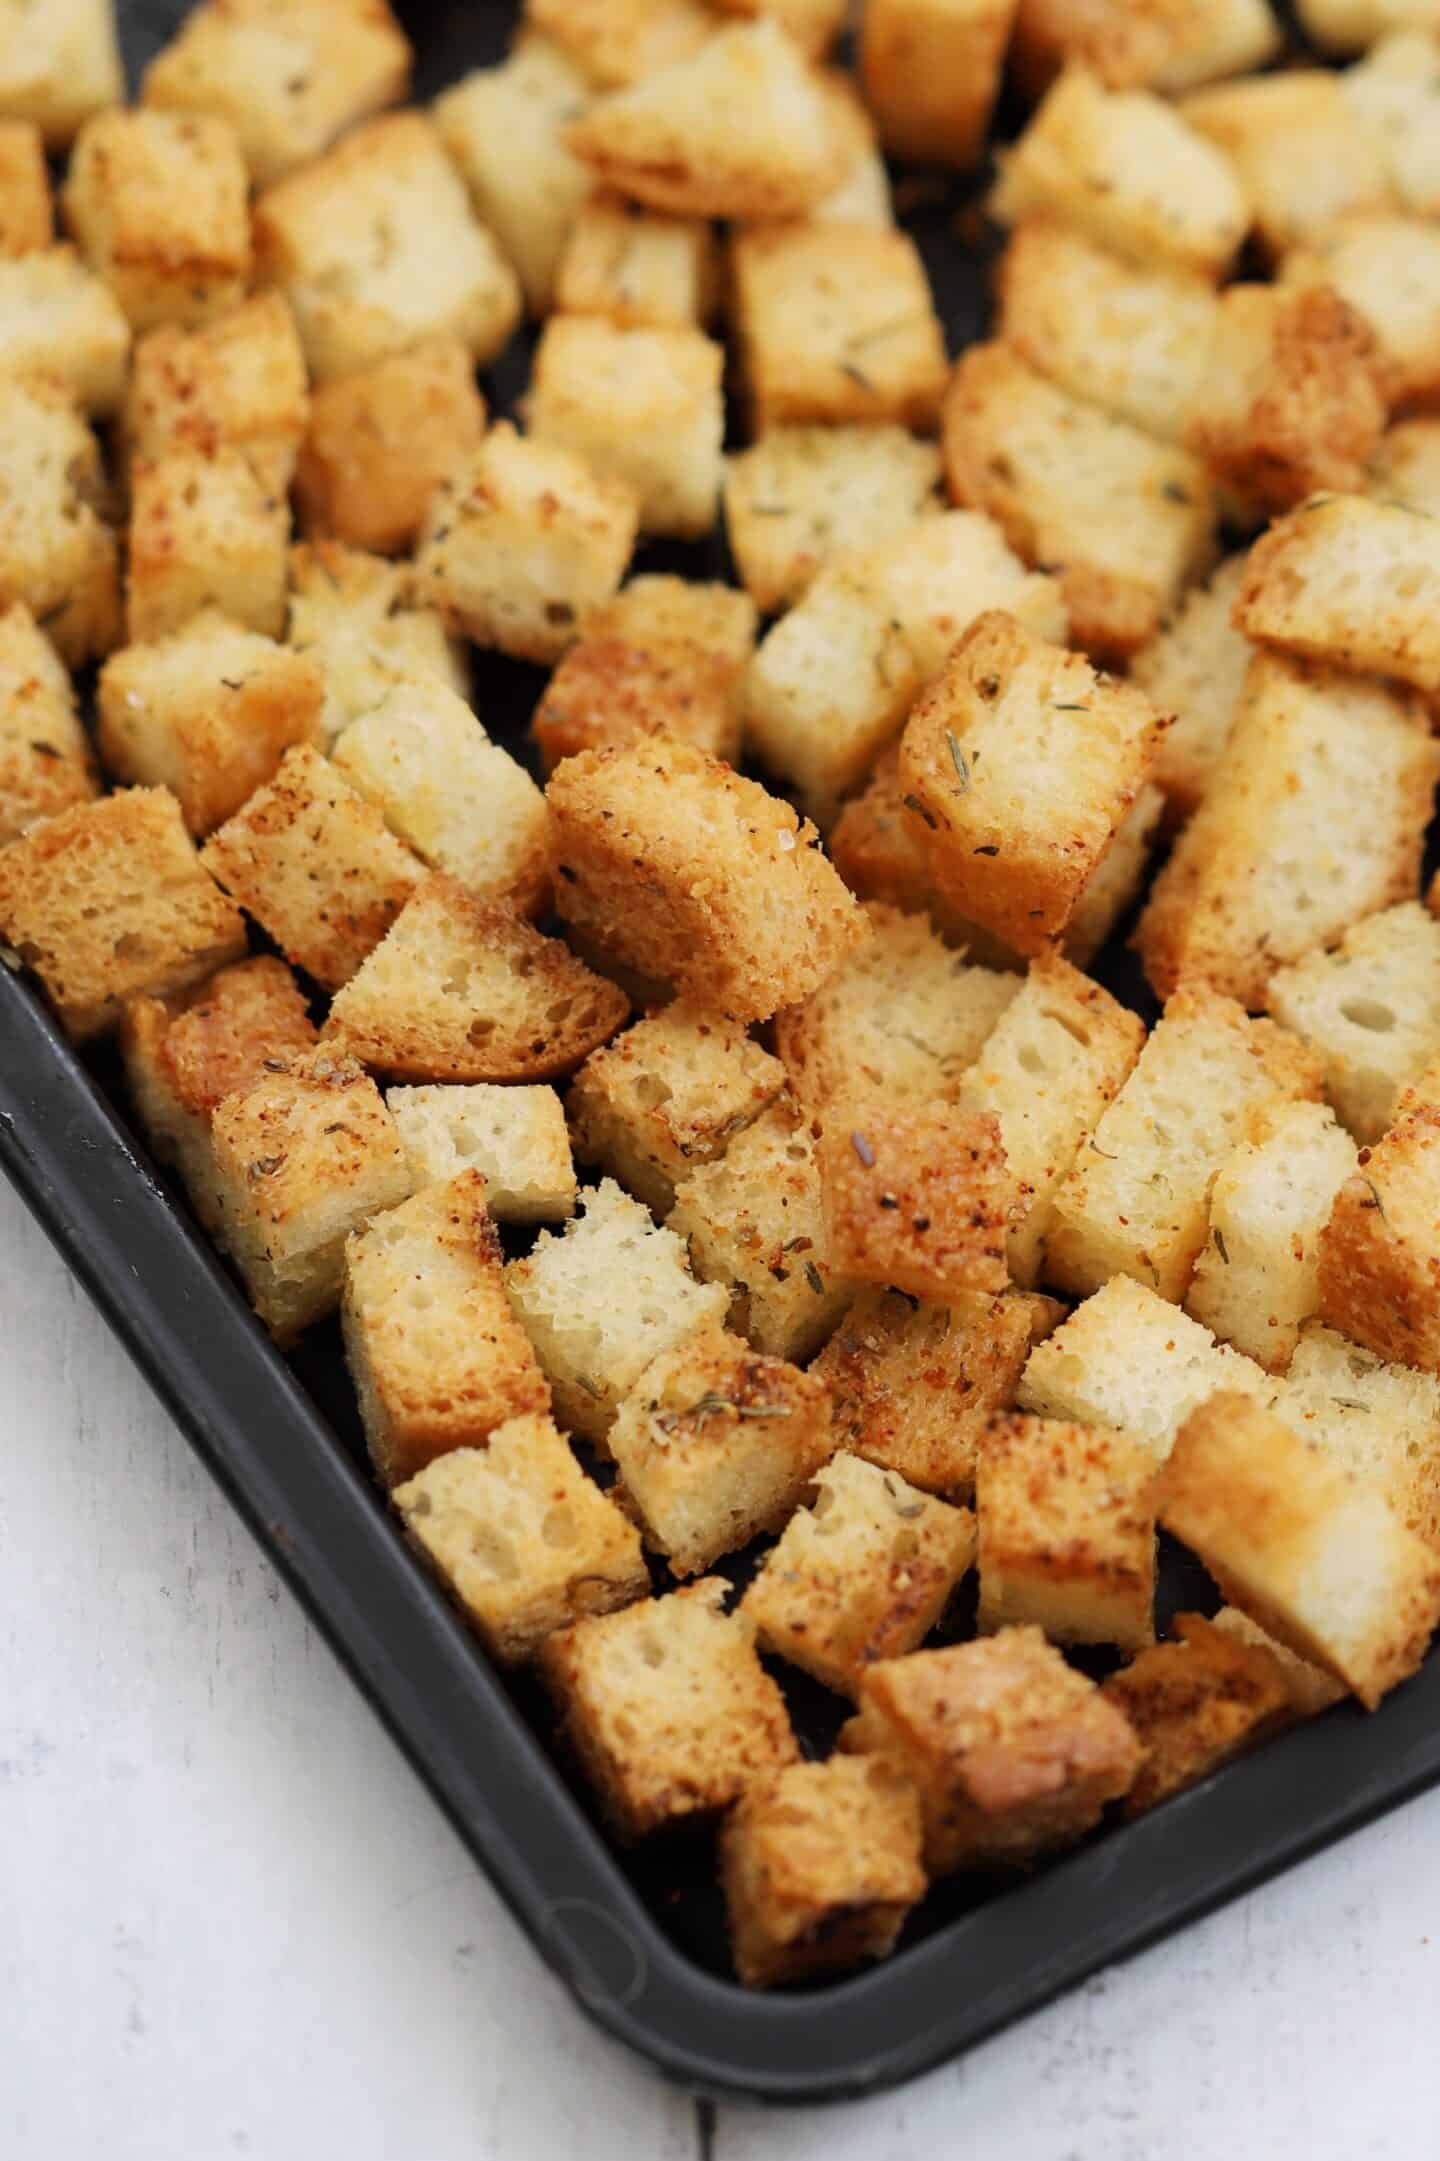 A tray of gluten free homemade croutons.